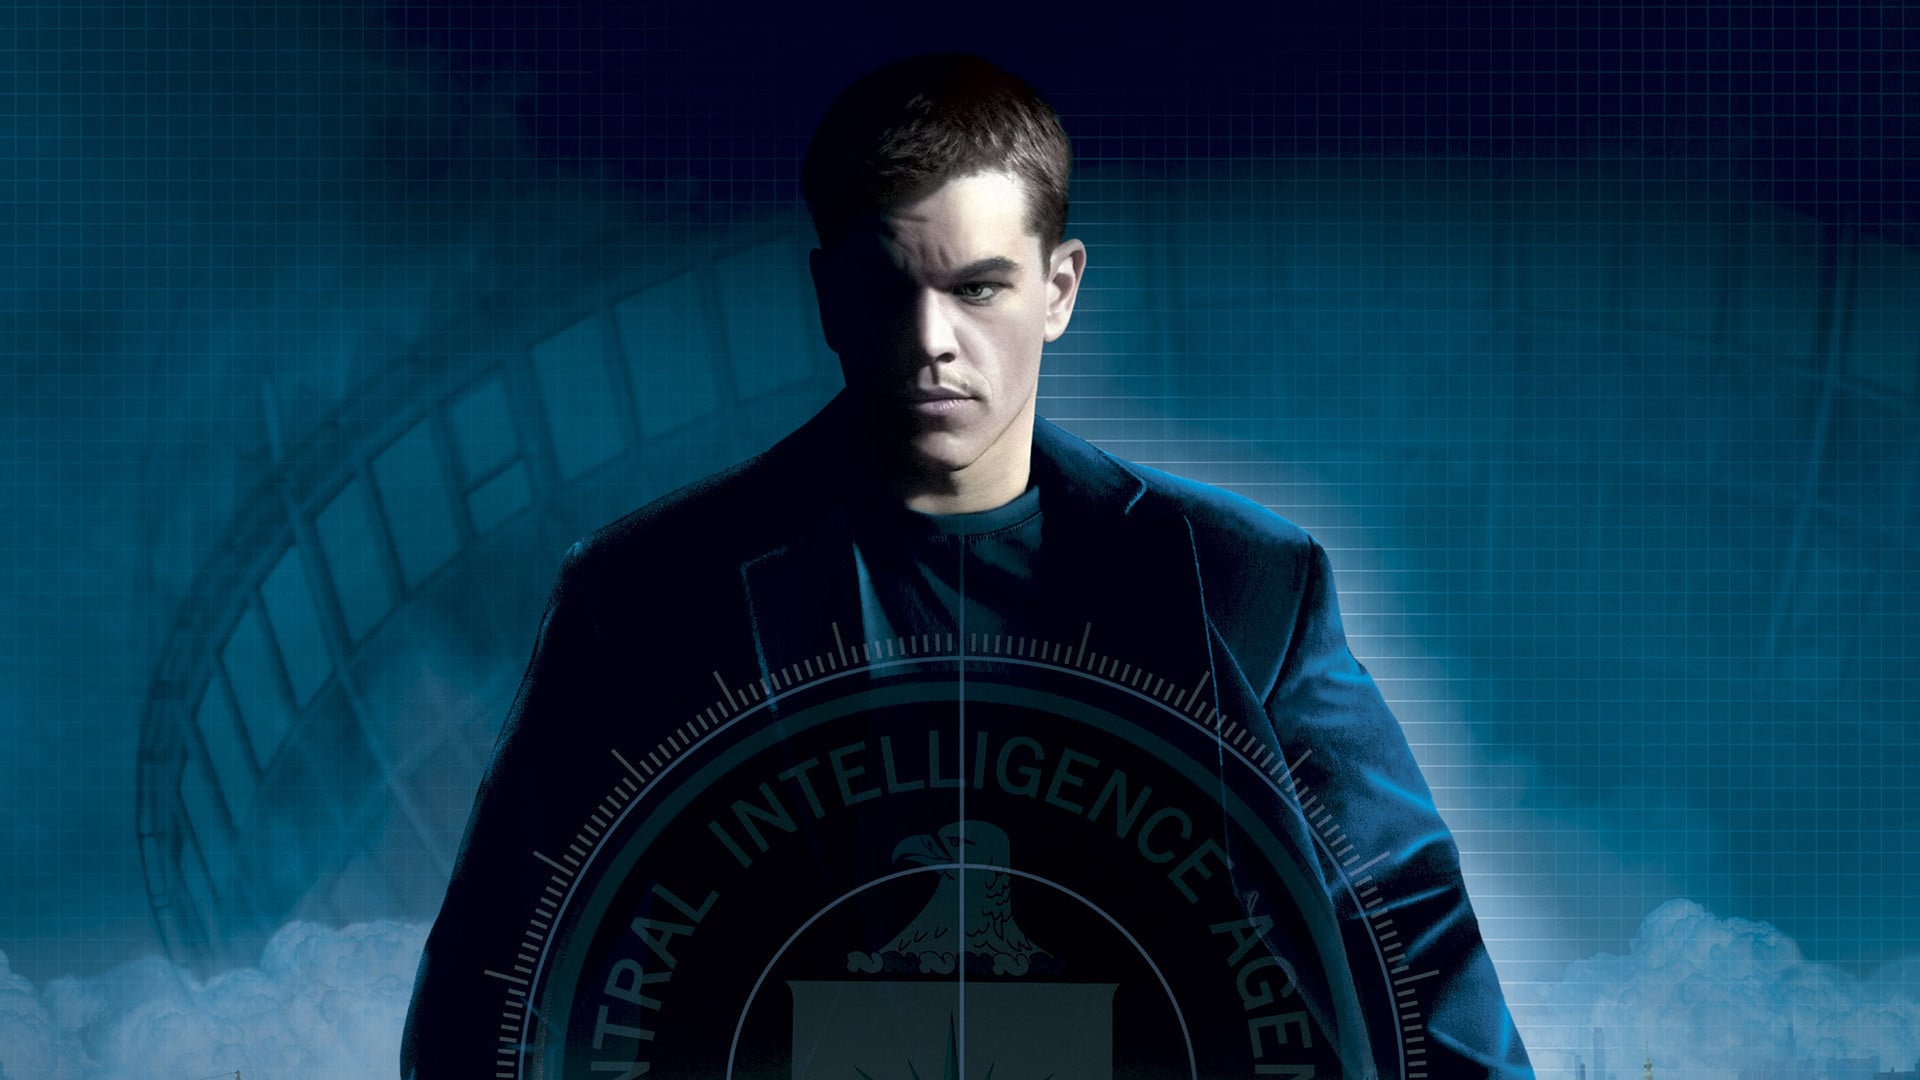 what is the correct order of the jason bourne movies